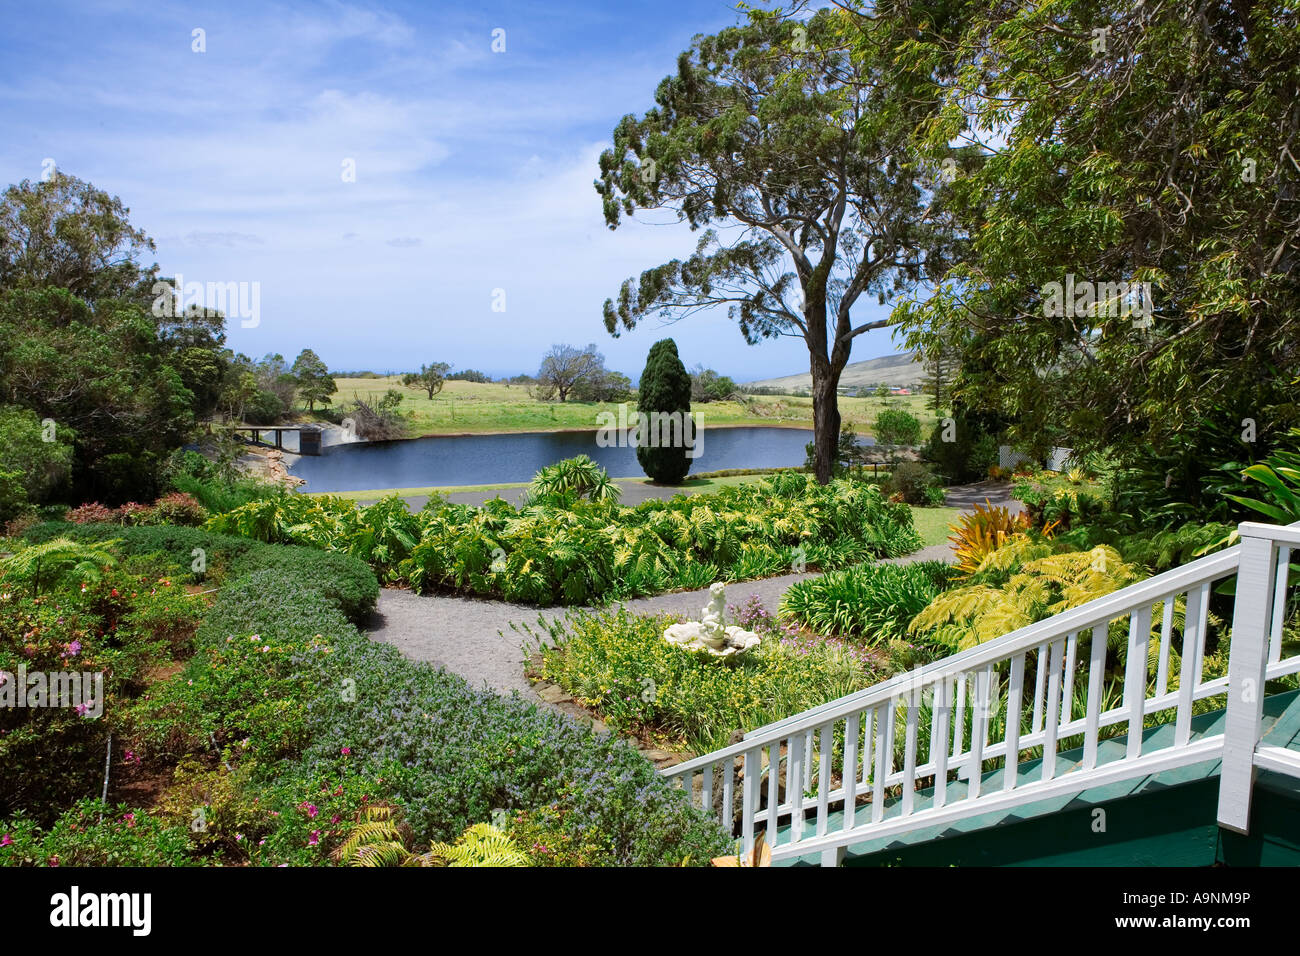 Image of the garden setting including lake and white staircase outside of the Parker Ranch House in Waimea Hawaii Stock Photo